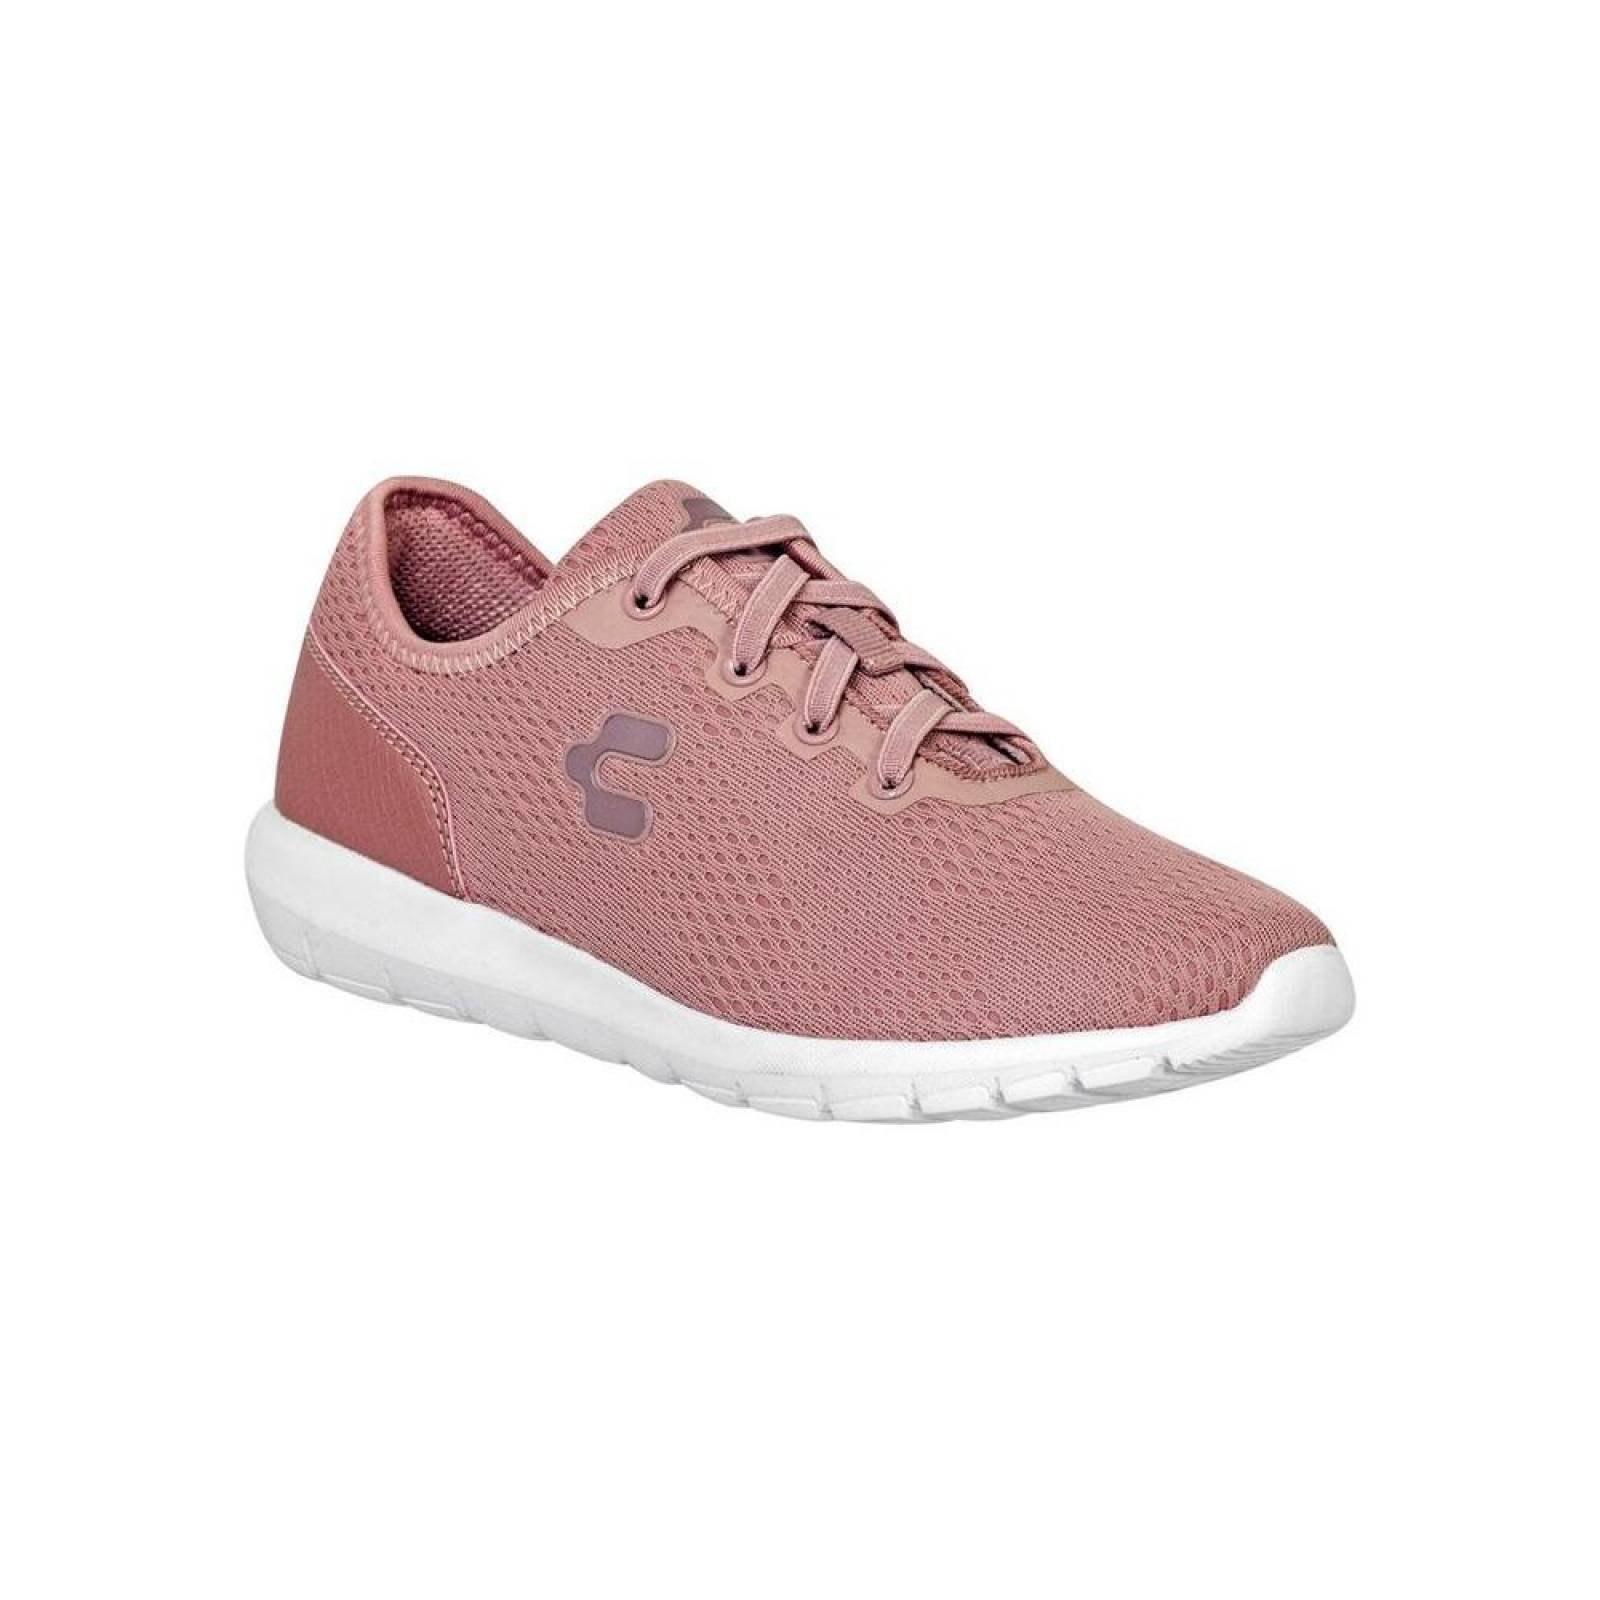 Tenis Charly Mujer Rosa Textil 1049085 